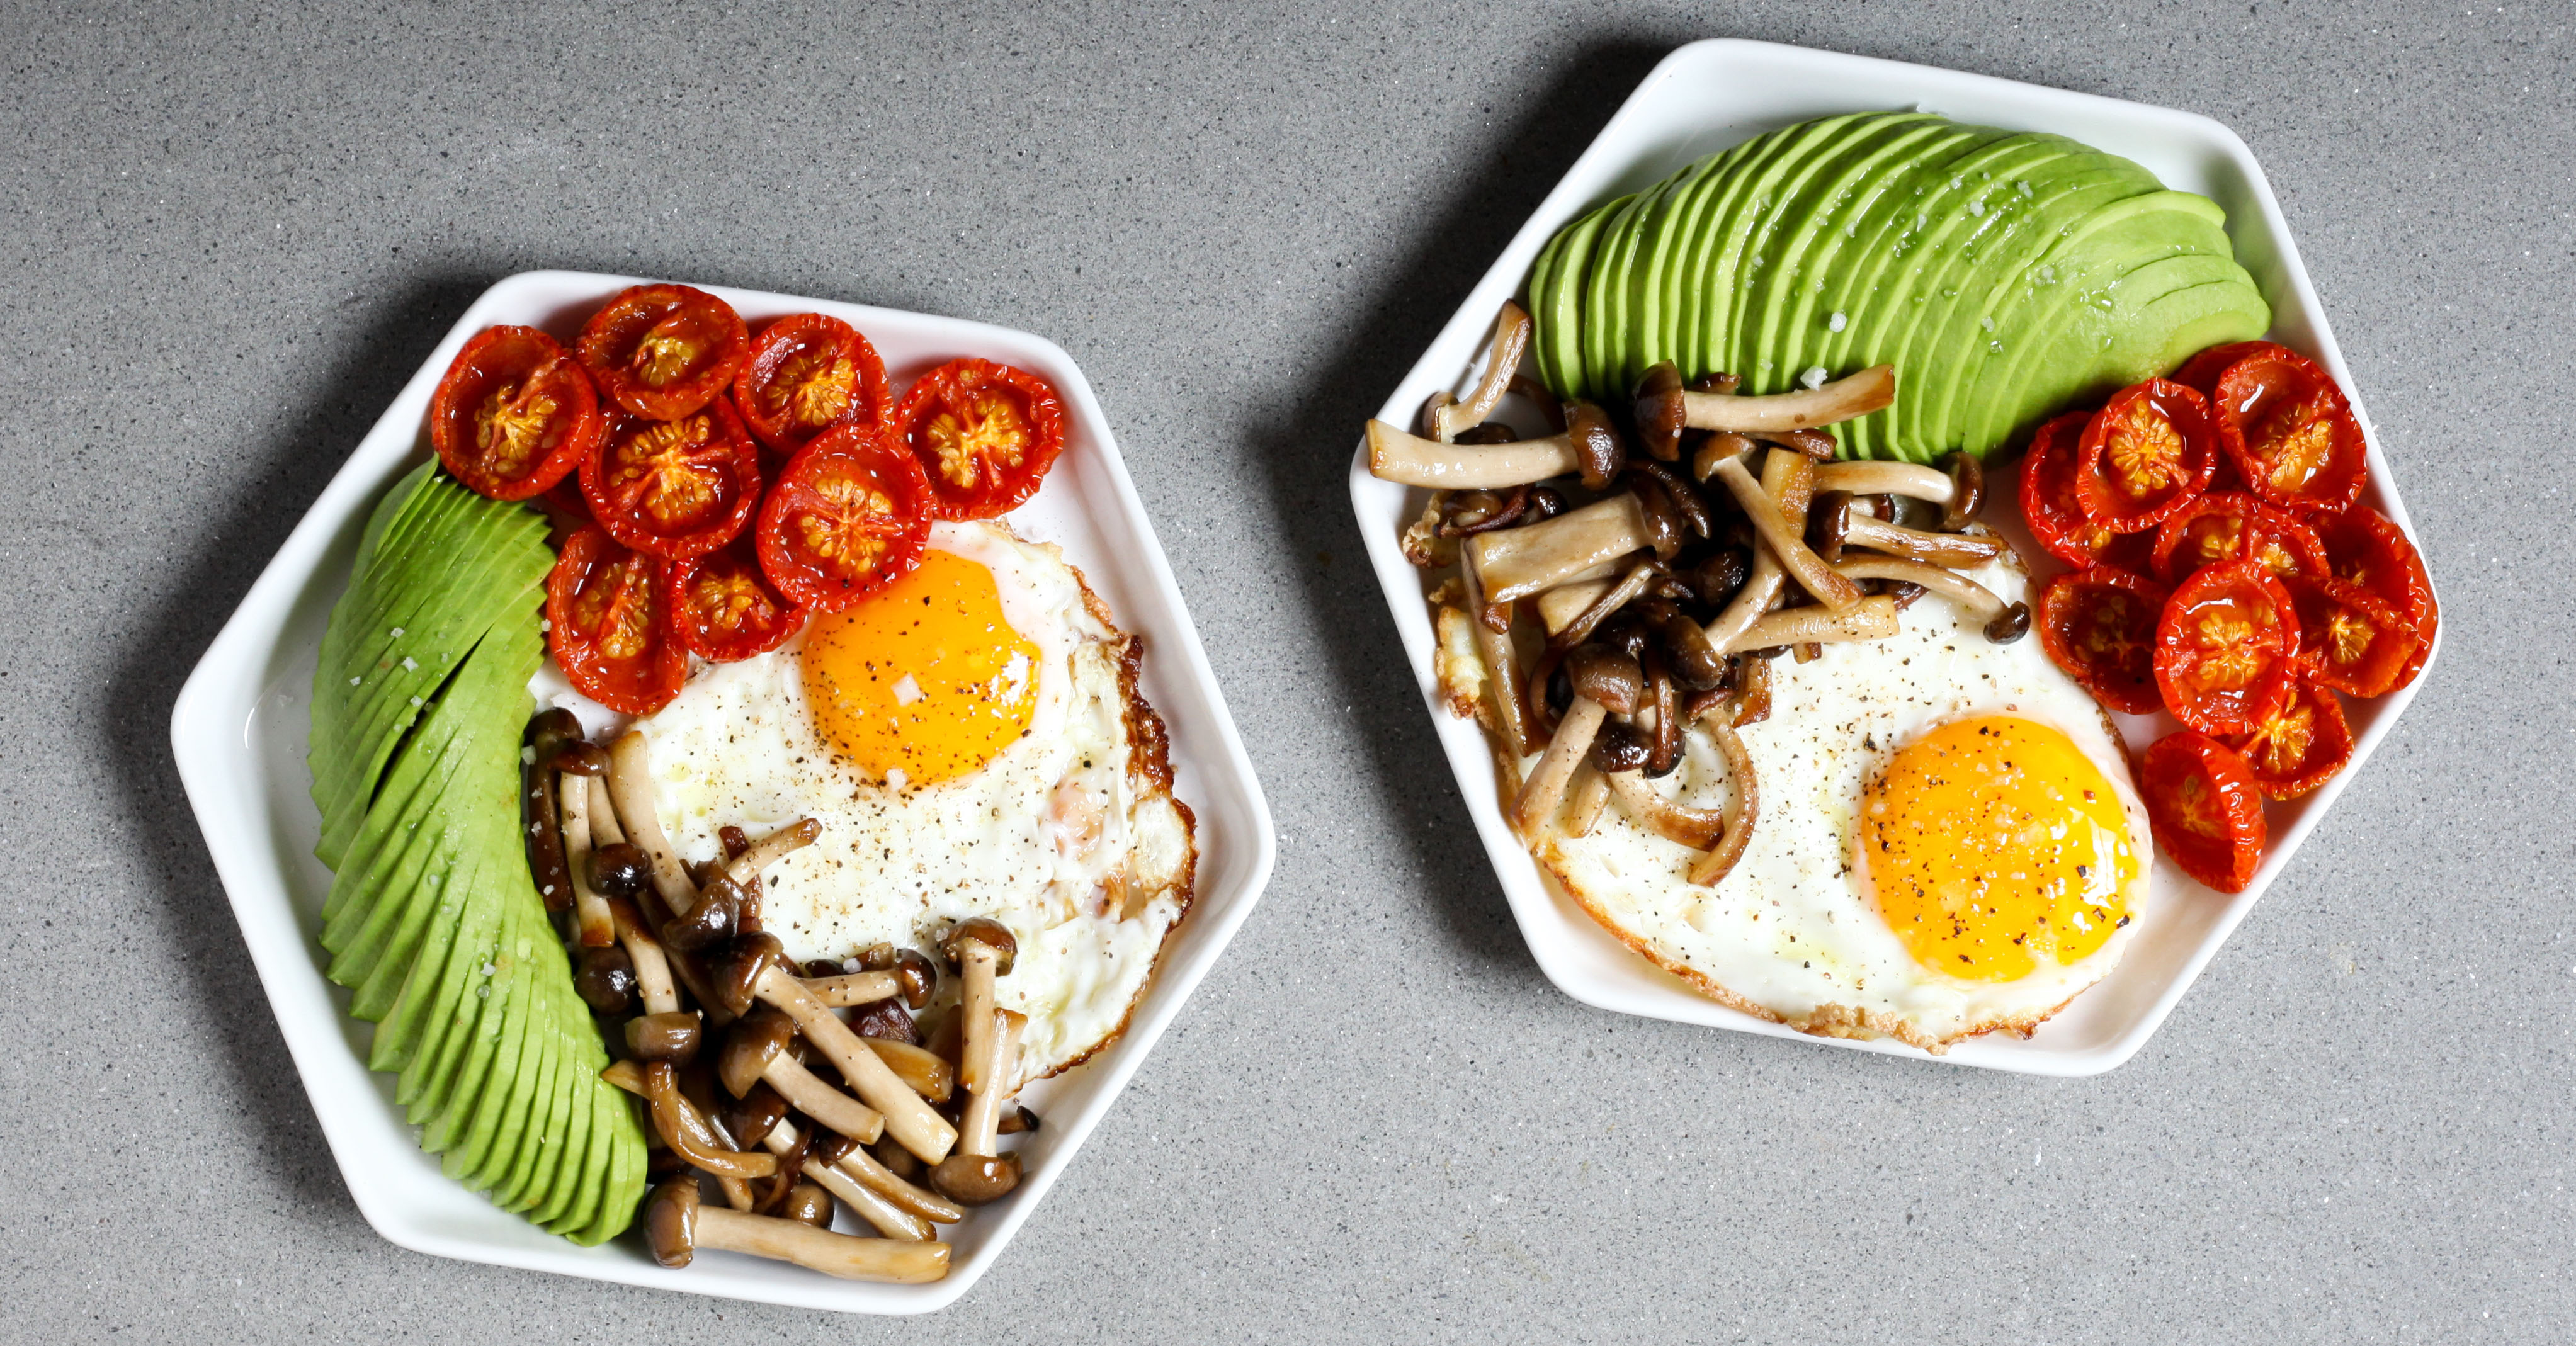 Fried Eggs With Roasted Tomatoes and Mushrooms